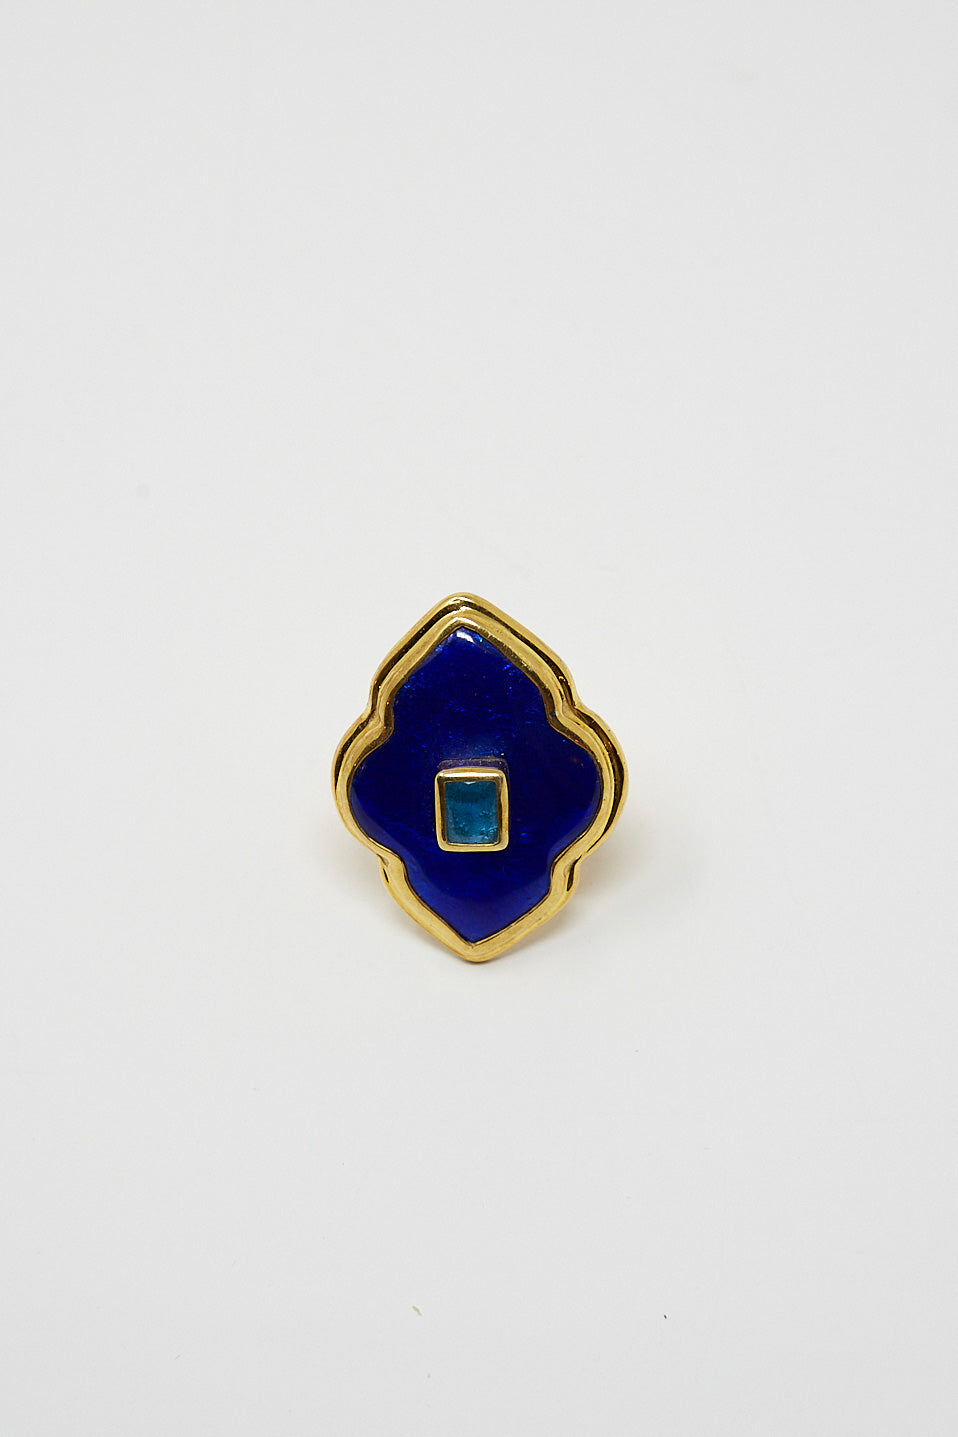 A Sofio Gongli ring in Blue with Light Blue Center Square, featuring an intricate enamel design created using the cloisonné technique.